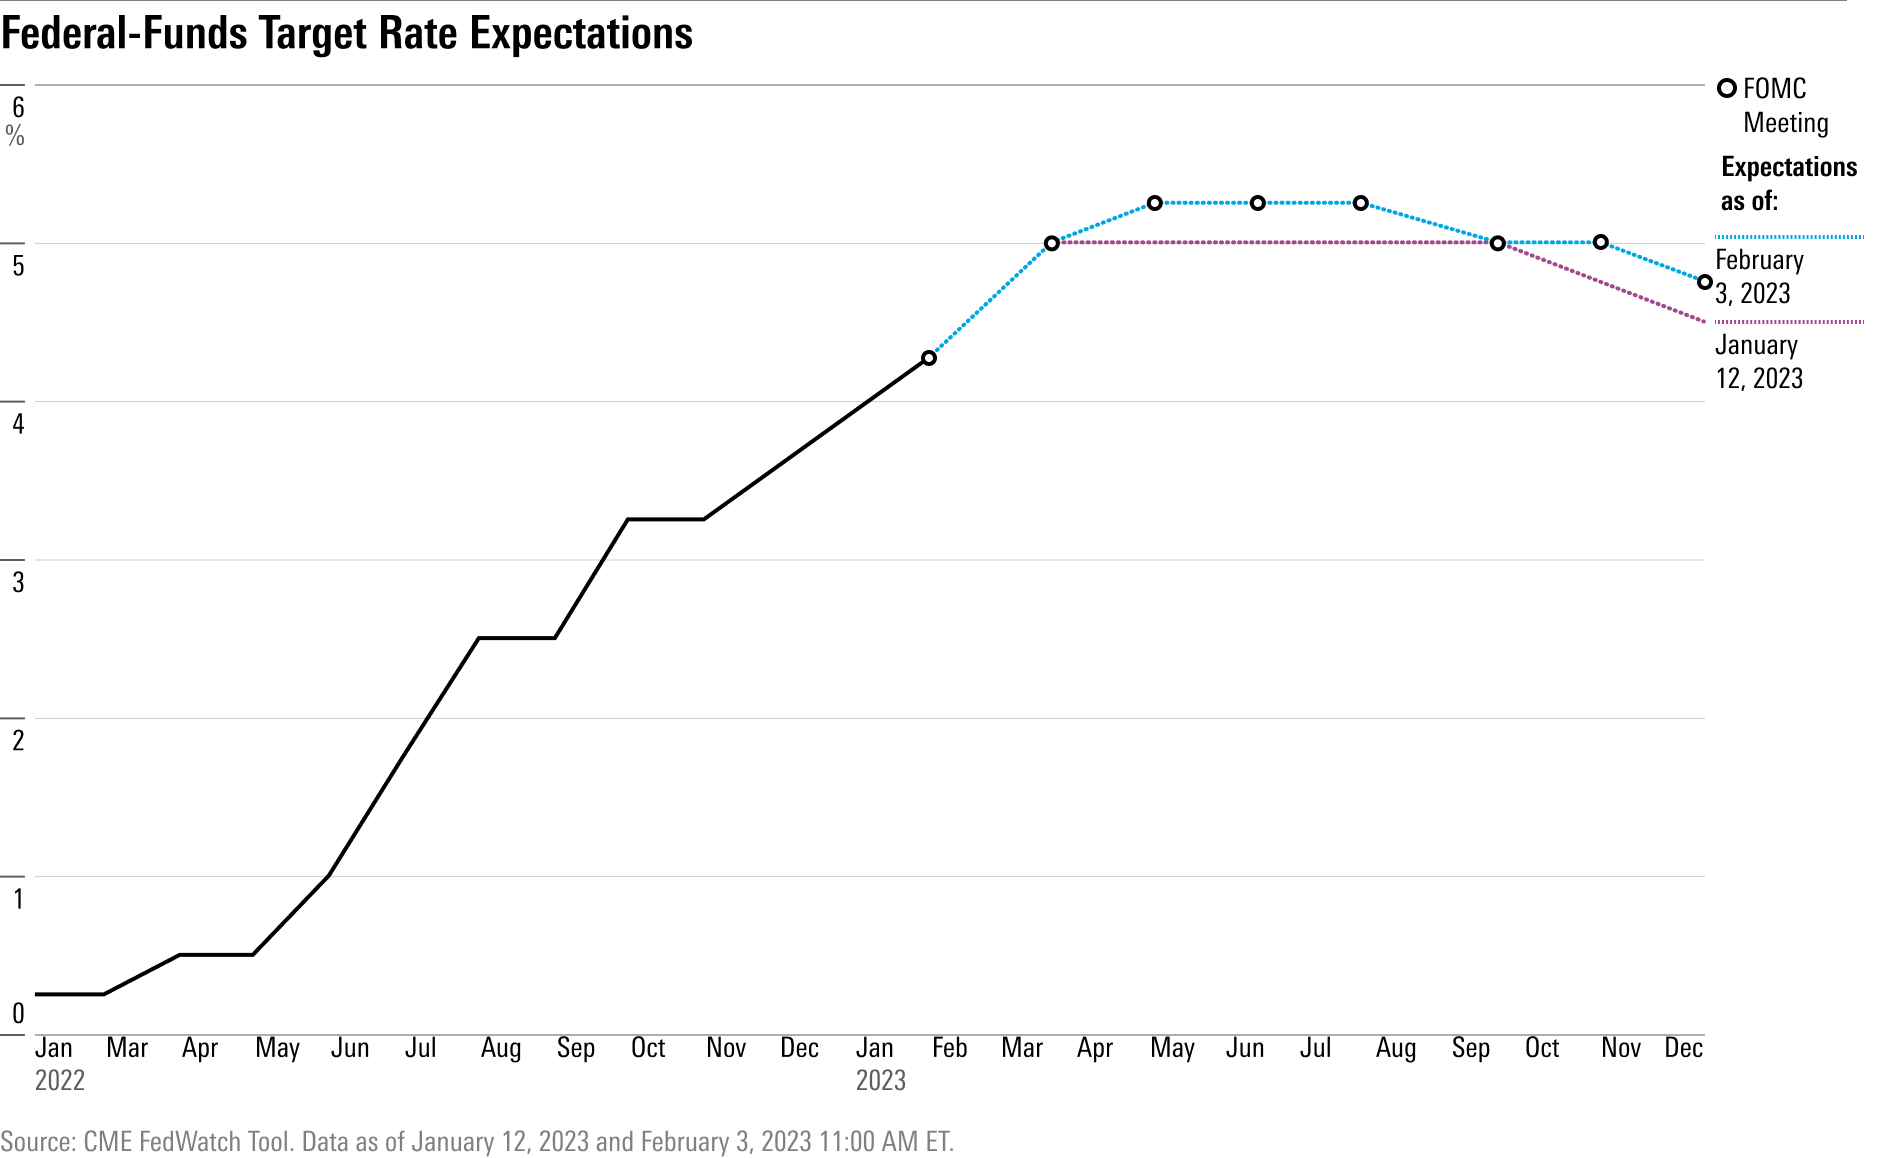 Federal-Funds target rate expectations through December 2023.